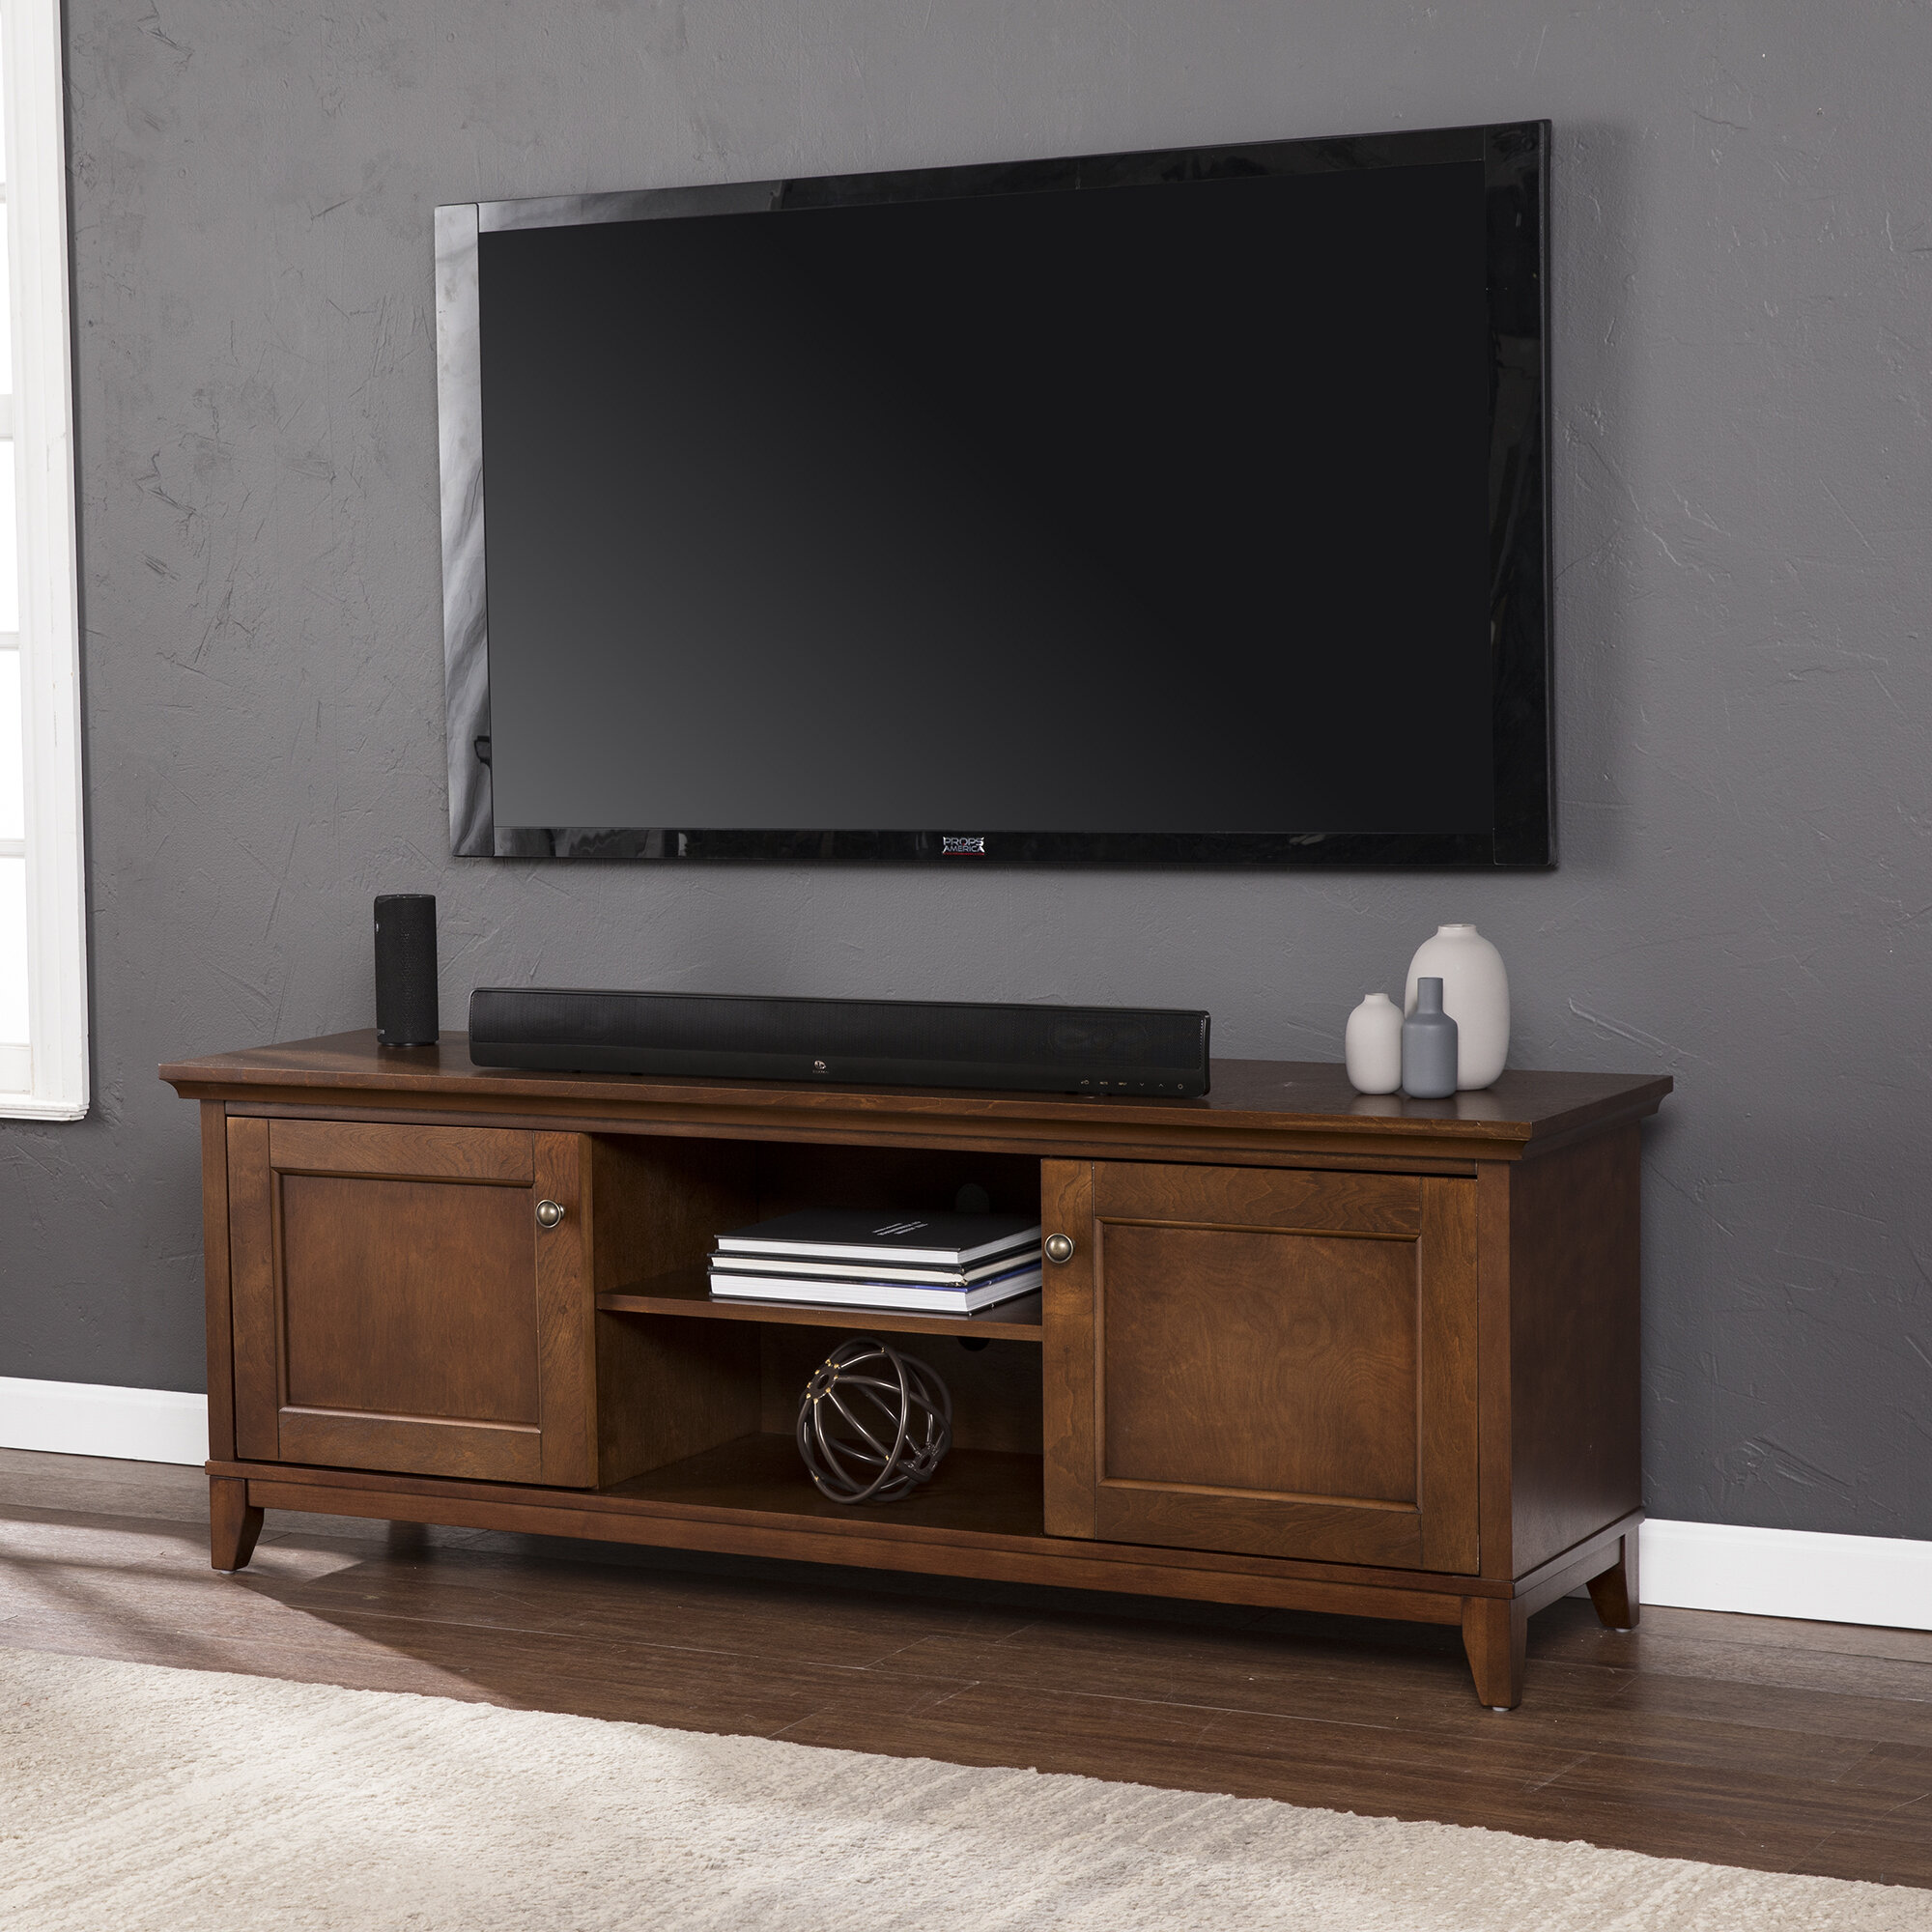 Charlton Home Jerry Tv Stand For Tvs Up To 65 Reviews Wayfair